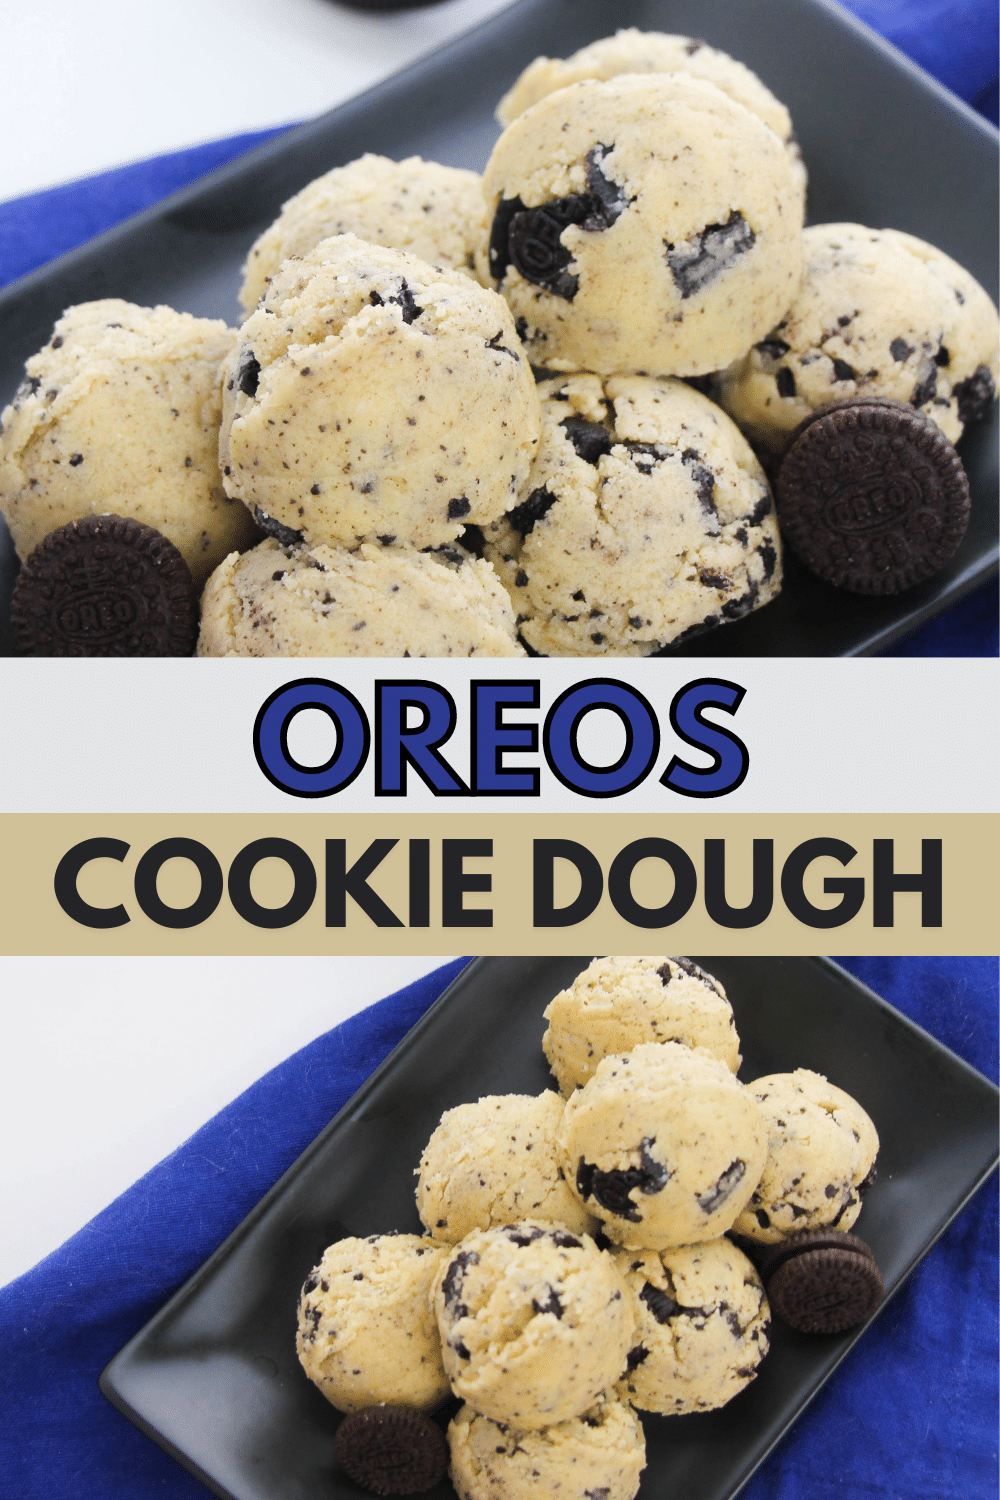 This Oreos Cookie Dough is made with a sweet and salty combination of Oreo crumbs and cookie dough making it the perfect dessert or snack! #oreocookiedough #oreoscookiedough #ediblecookiedough #oreos #cookiedough via @wondermomwannab